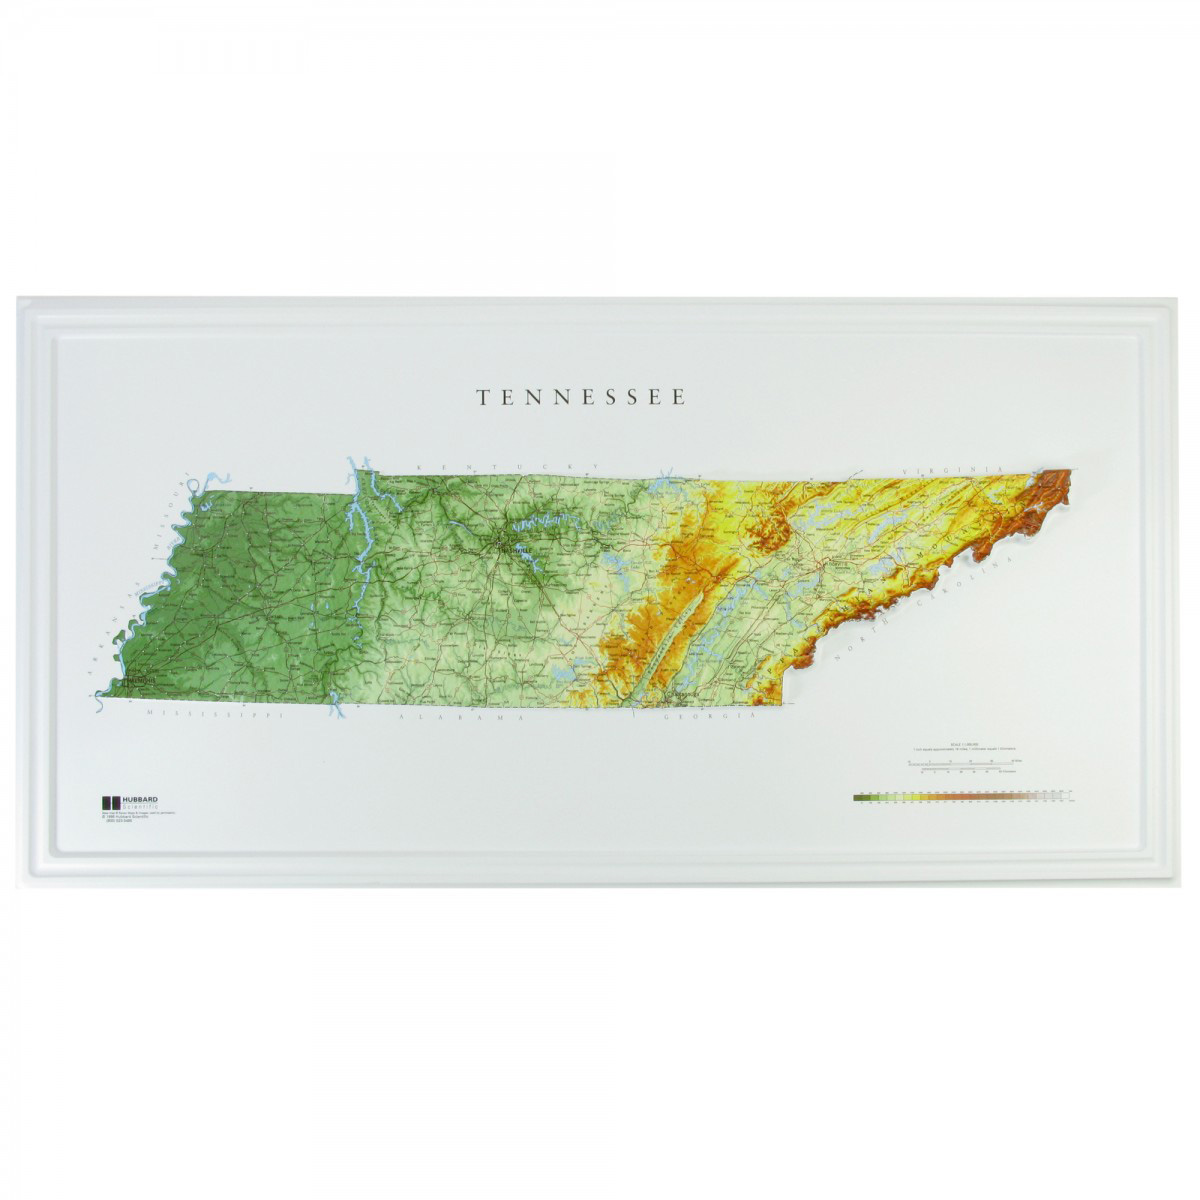 Picture of TestPlay 3072 36 x 18 in. Tennessee State Raised Relief Map, Rubberized Foam Backing - Large